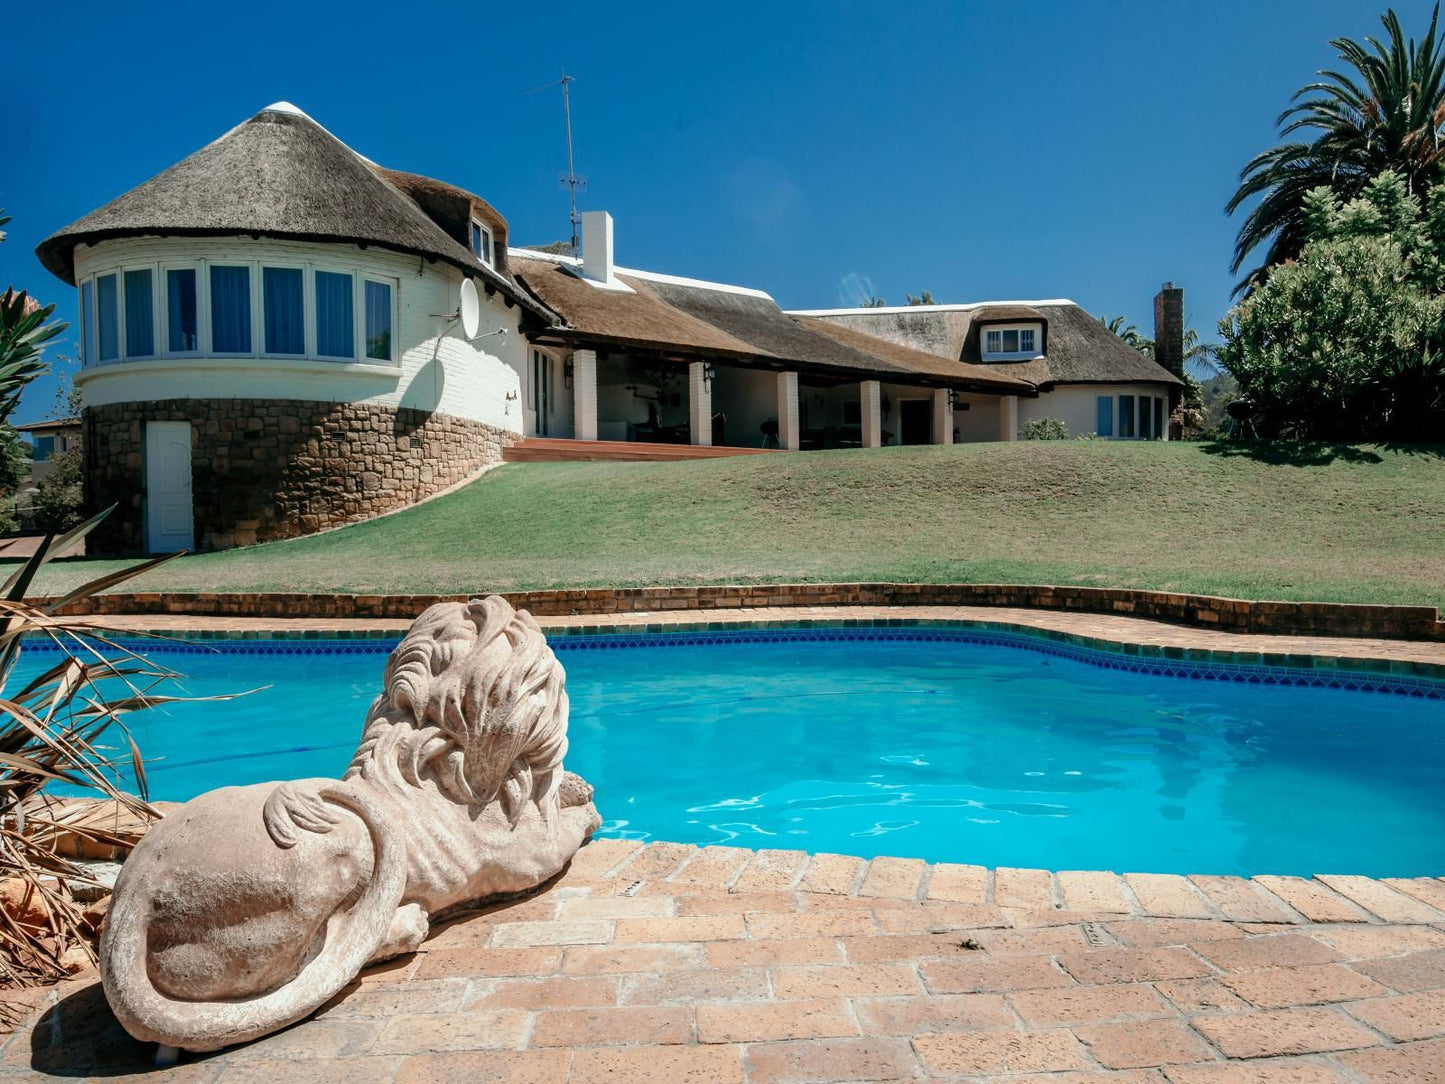 La Felicita Boutique Villas And Apartments Parel Vallei Somerset West Western Cape South Africa House, Building, Architecture, Swimming Pool